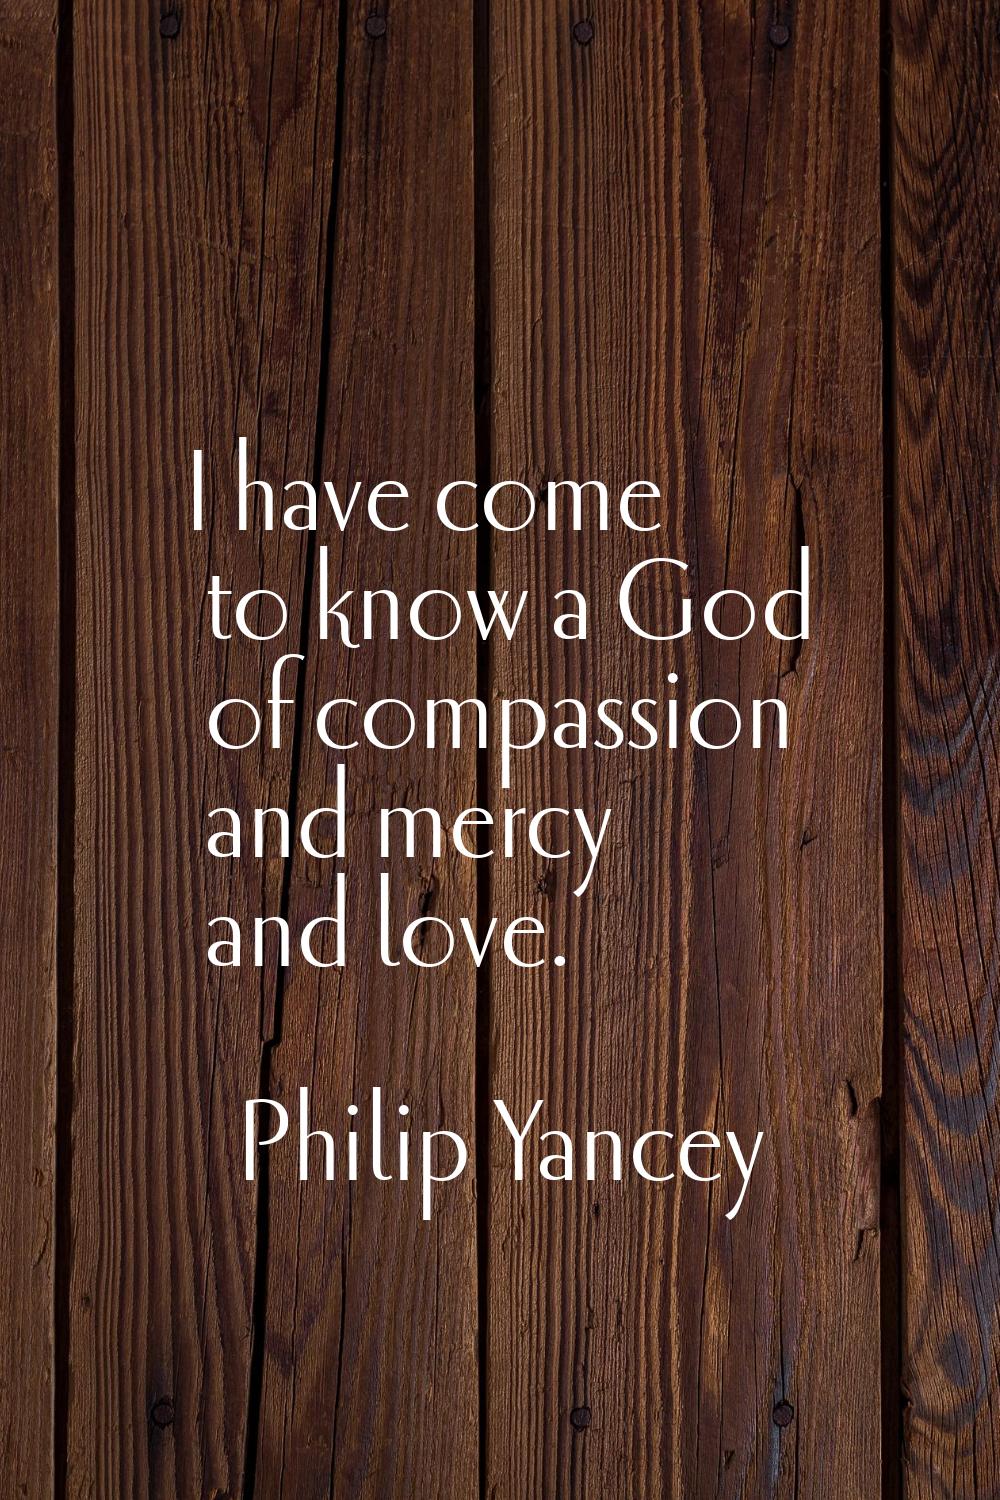 I have come to know a God of compassion and mercy and love.